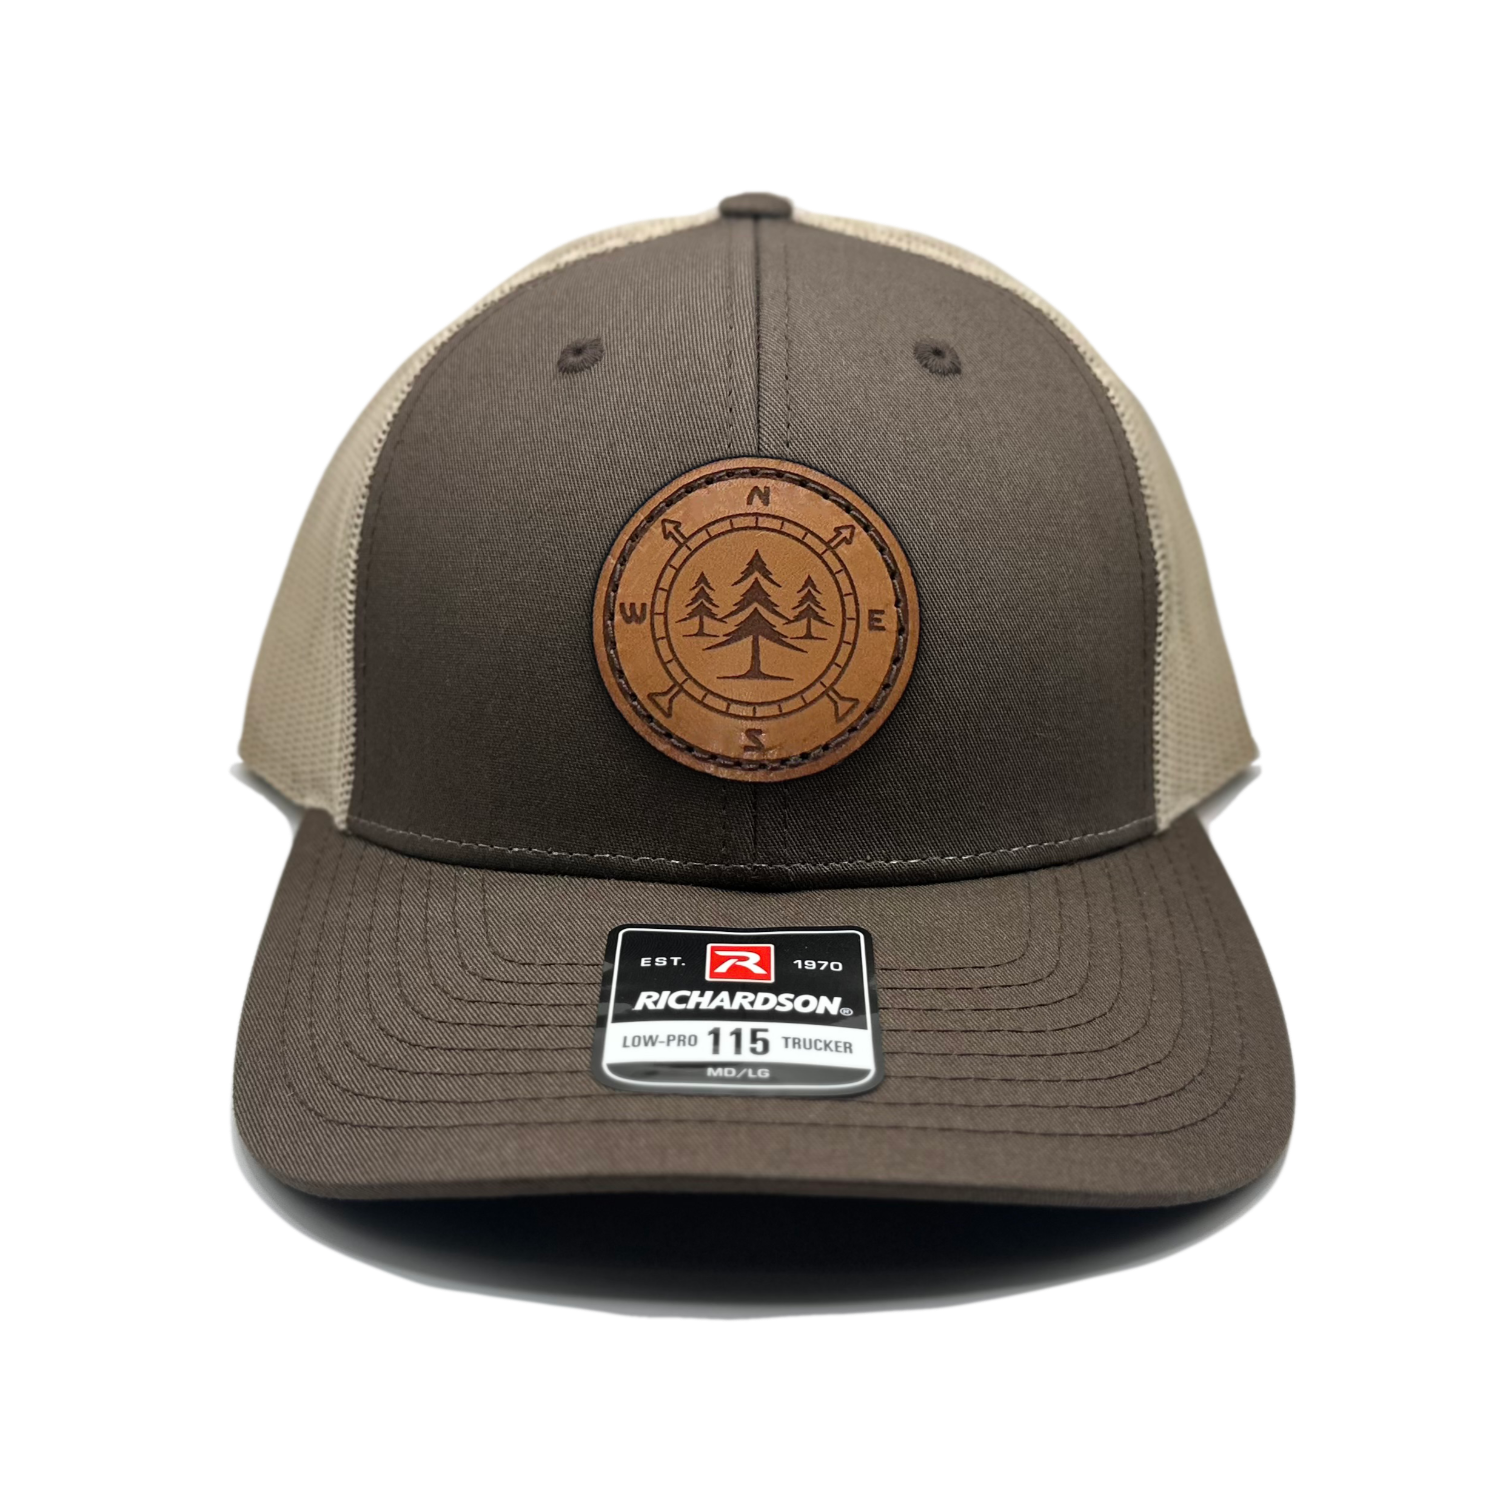 A high-quality leather patch hat named Lost Pines, showcasing a distinctive compass and pine trees design on a circular leather patch. Made in the USA, this hat features genuine leather craftsmanship and is affixed to a brown/khaki Richardson 115 low profile SnapBack hat. Available in small and m/l sizes and various colors, this unique hat is inspired by the picturesque mountains of Colorado. Perfect for hat enthusiasts and those seeking stylish leather patch designs.